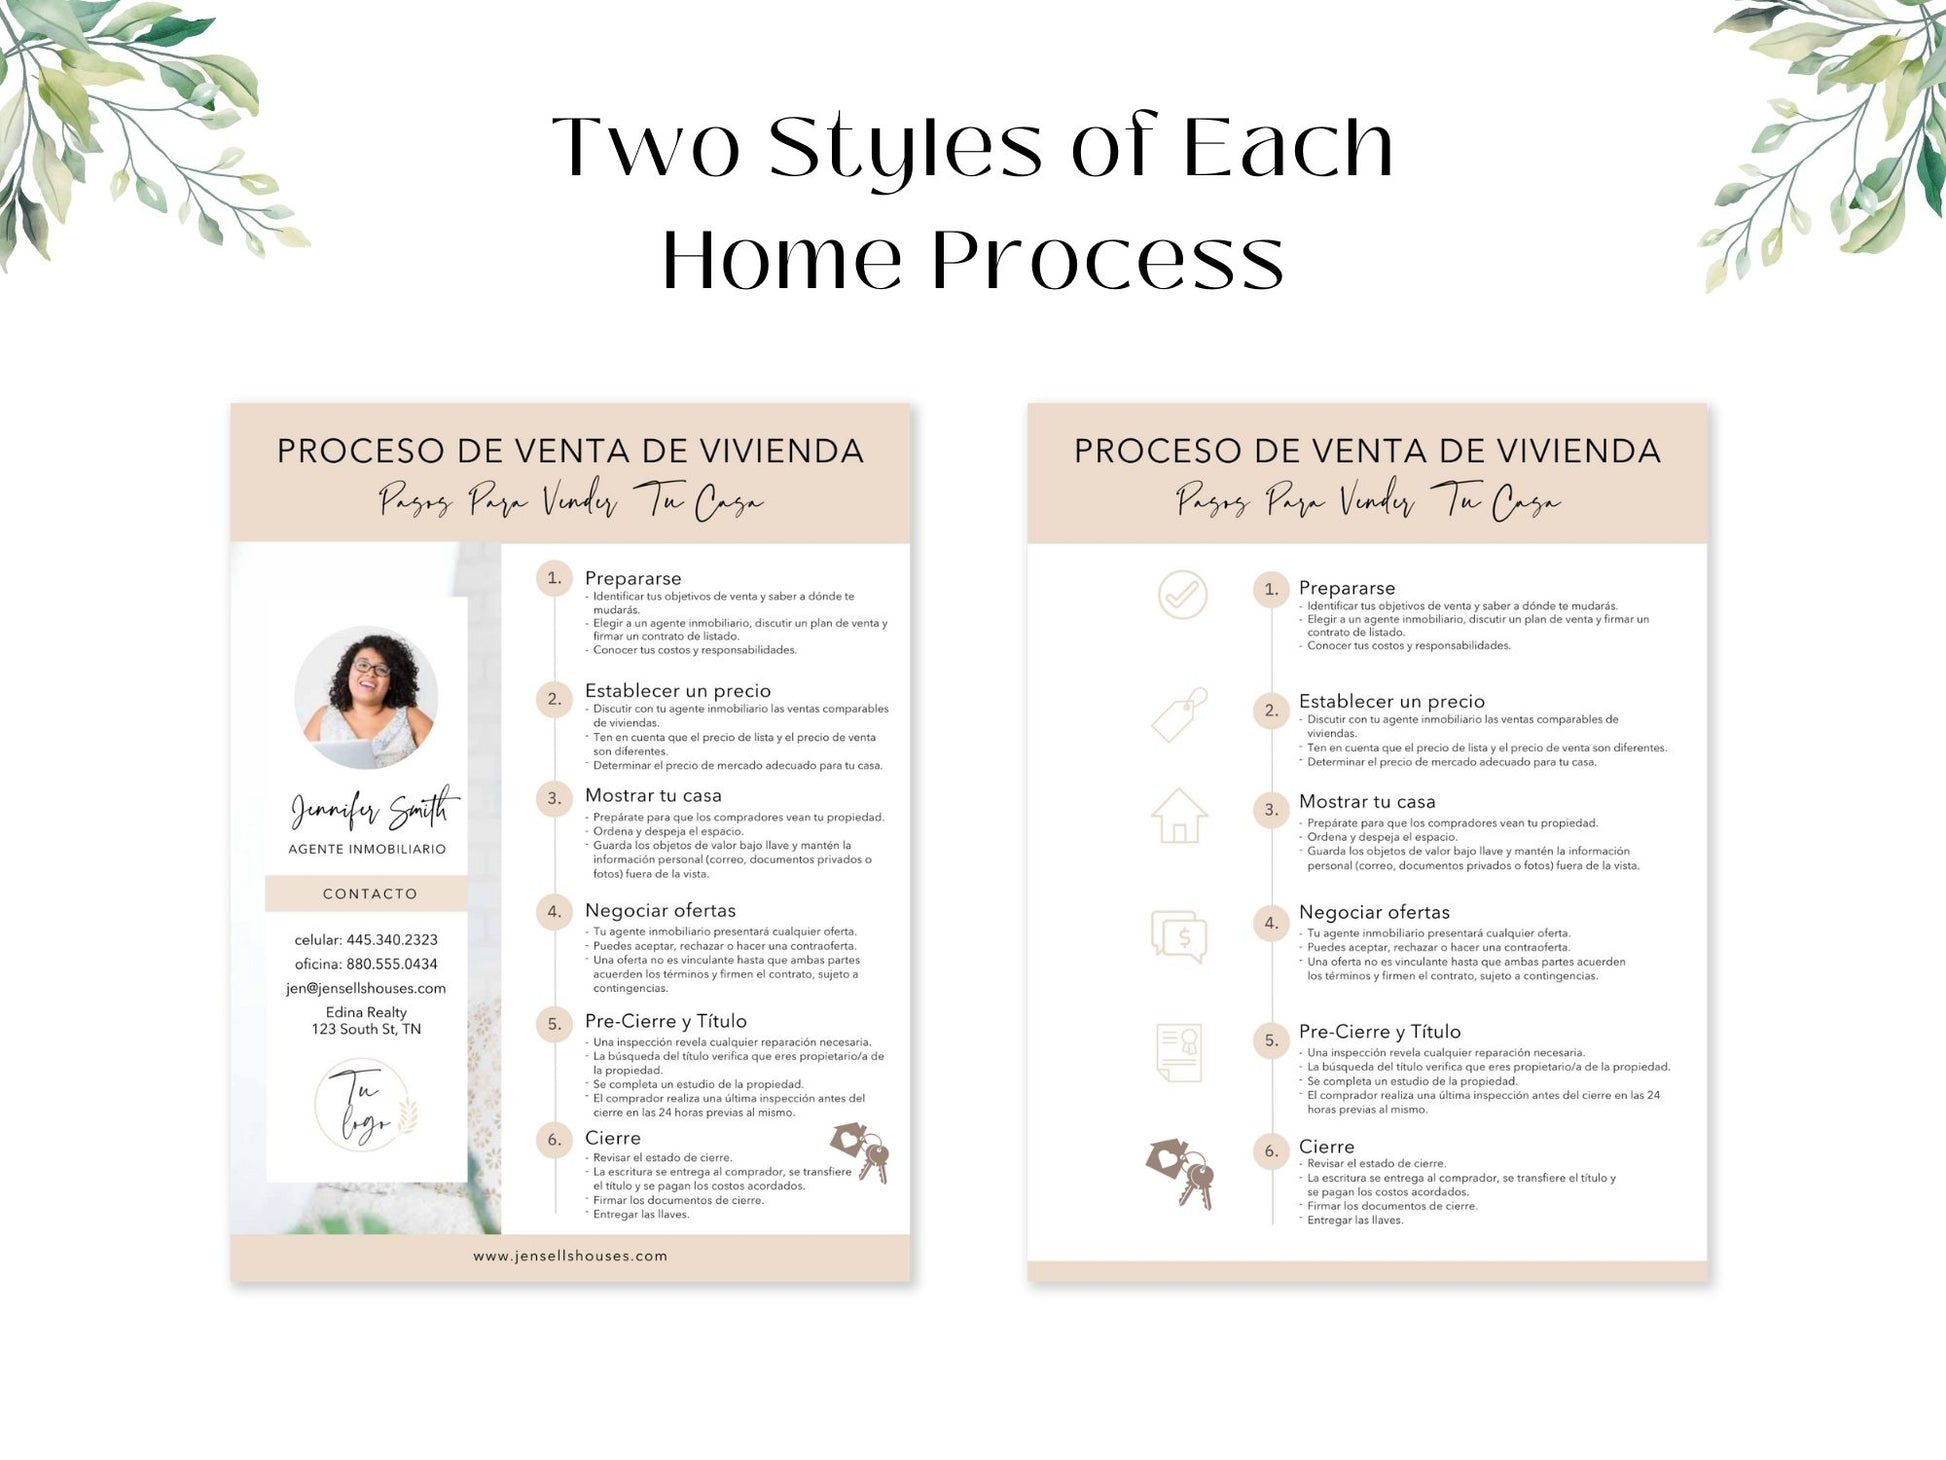 Spanish Home Buying and Selling Process Bundle - Essential tools for facilitating transactions with Spanish-speaking clients.